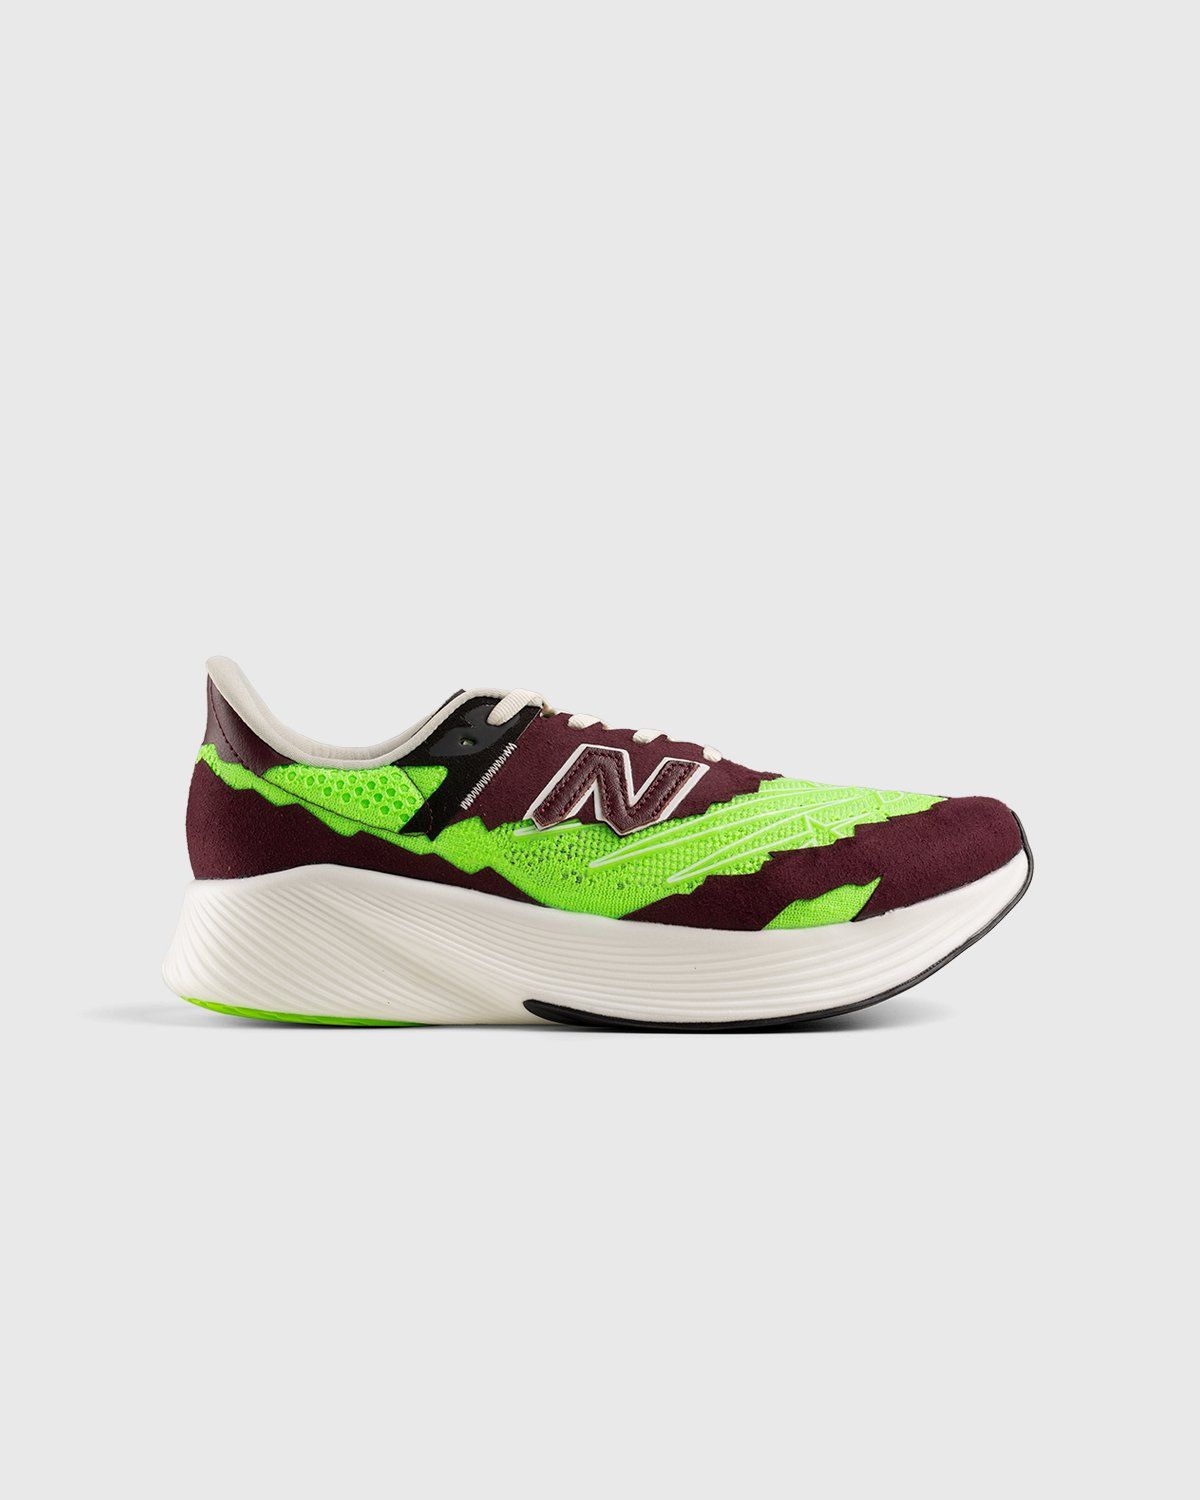 New Balance x Stone Island – FuelCell RC Elite v2 Energy Lime - Sneakers - Green - Image 1